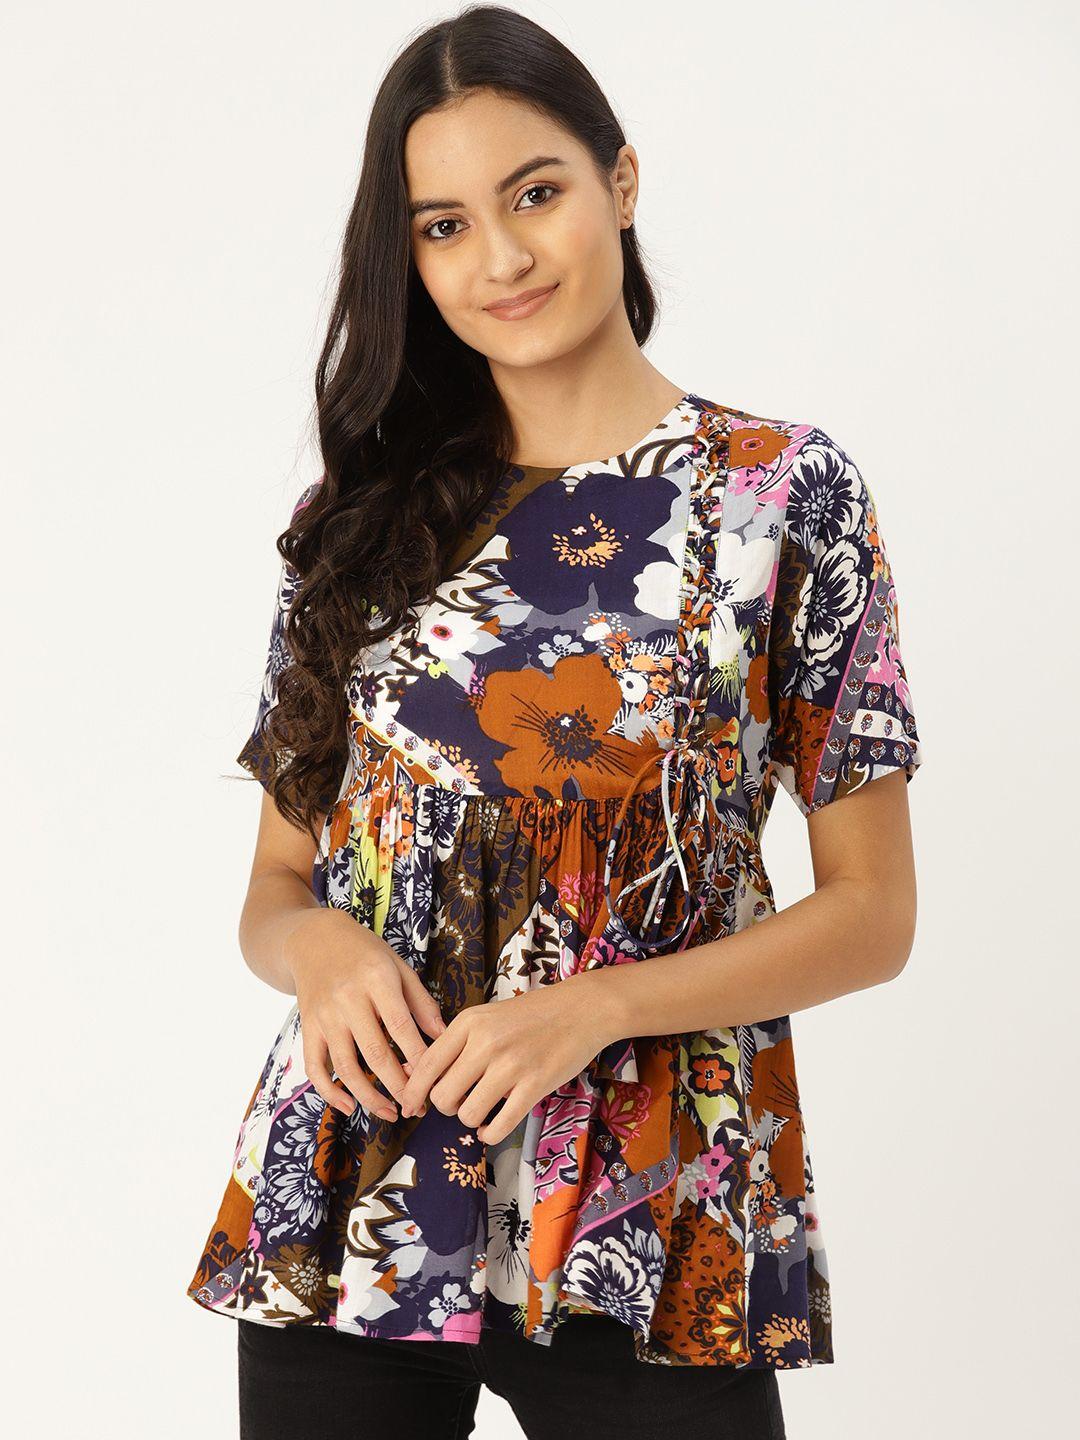 mbe women navy blue floral printed empire top